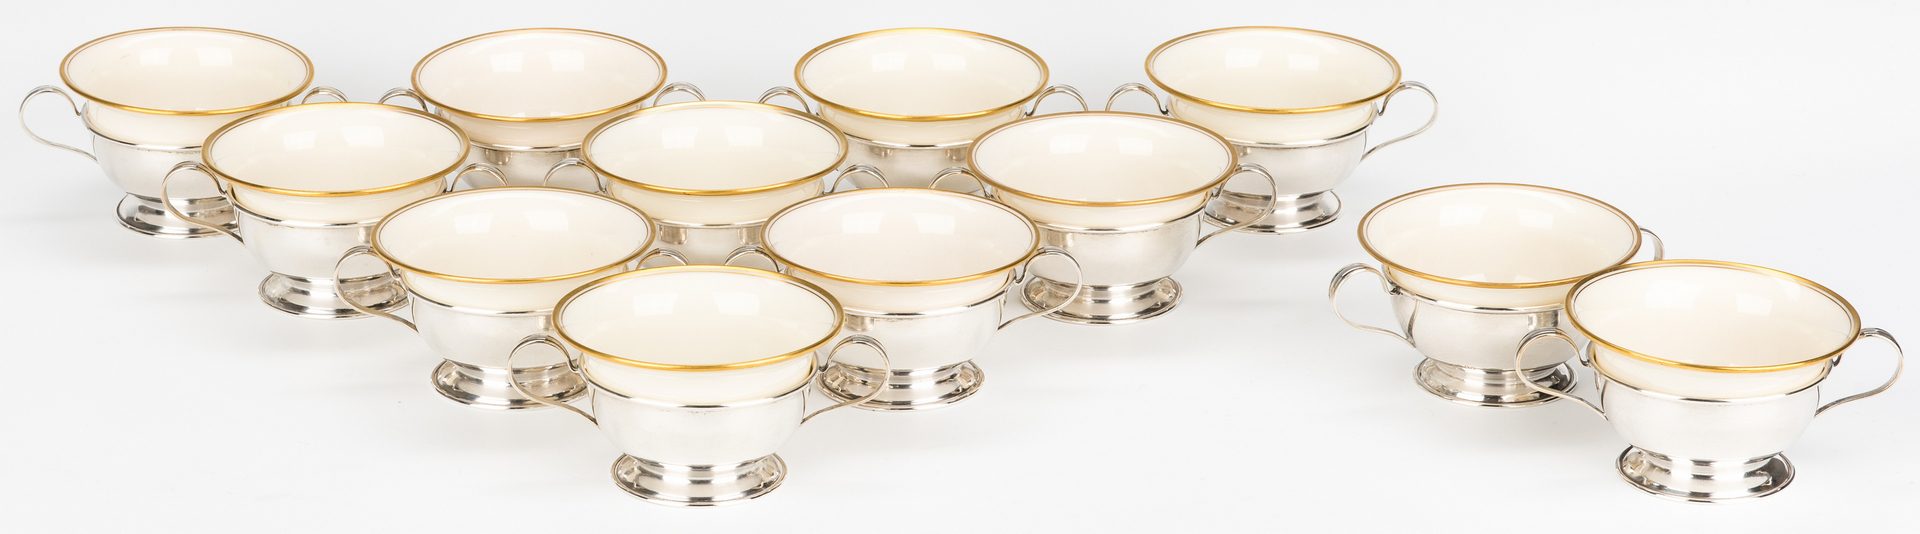 Lot 637: 12 Sterling Demitasse Cups w/ Inserts & 6 Sterling Sorbet Cups